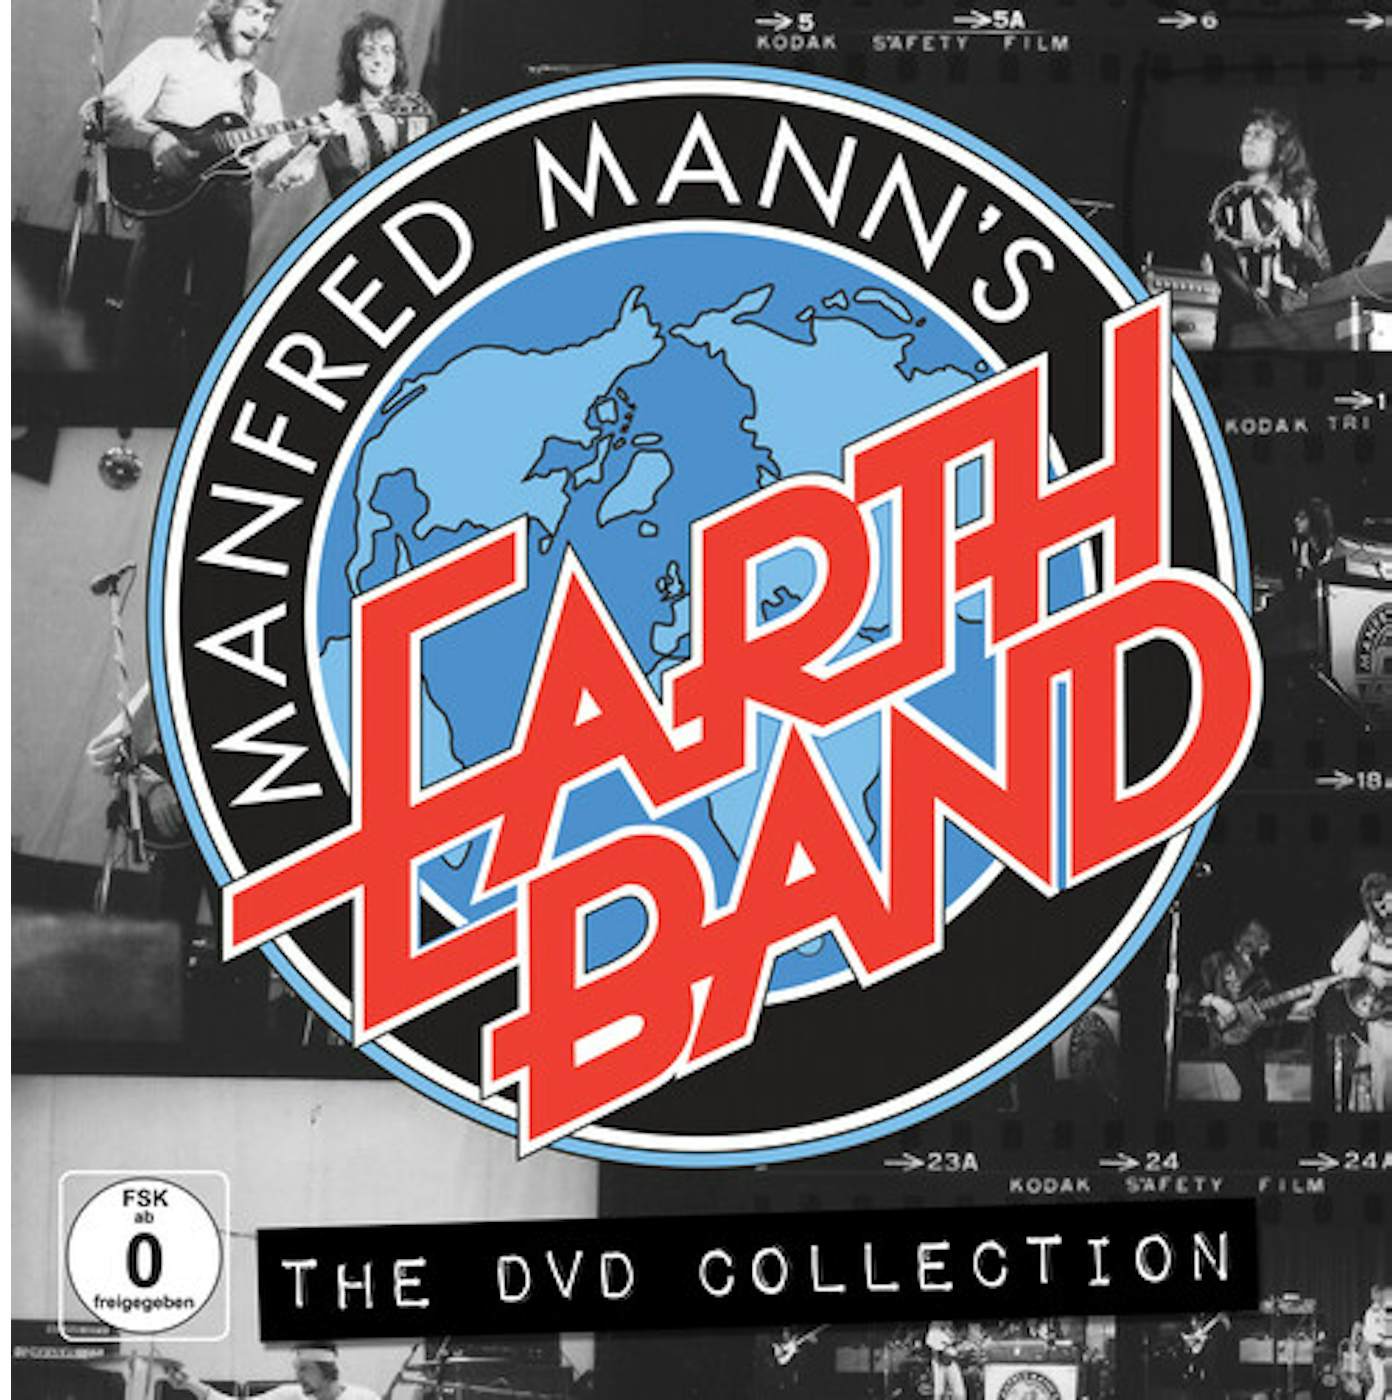 Manfred Mann's Earth Band DVD COLLECTION DVD